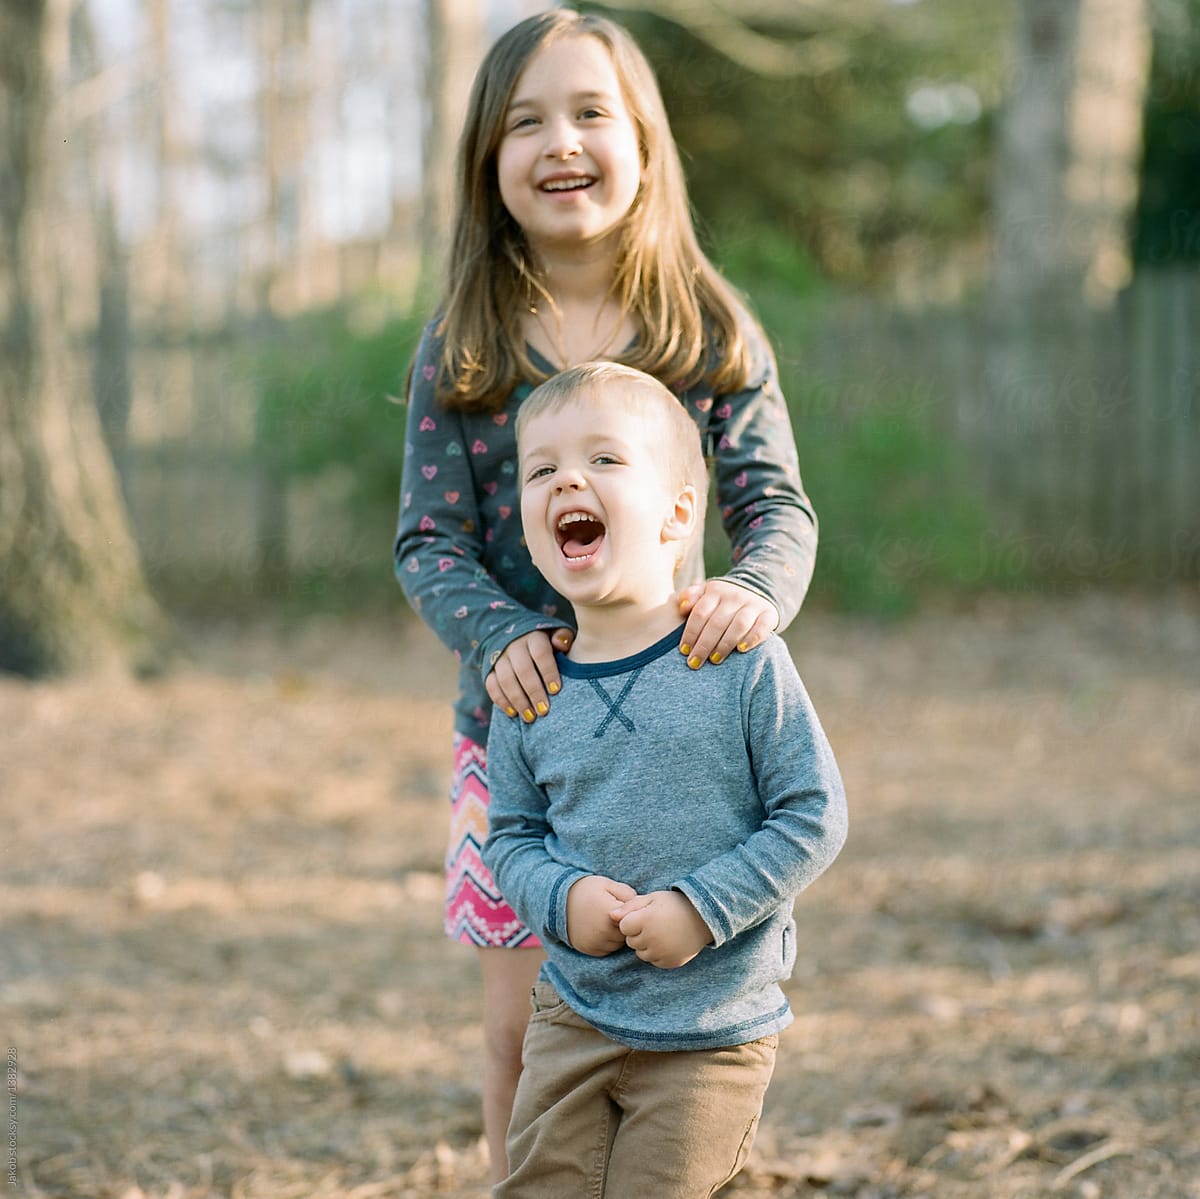 Adorable Siblings Hugging Each Other by Stocksy Contributor Jakob  Lagerstedt - Stocksy